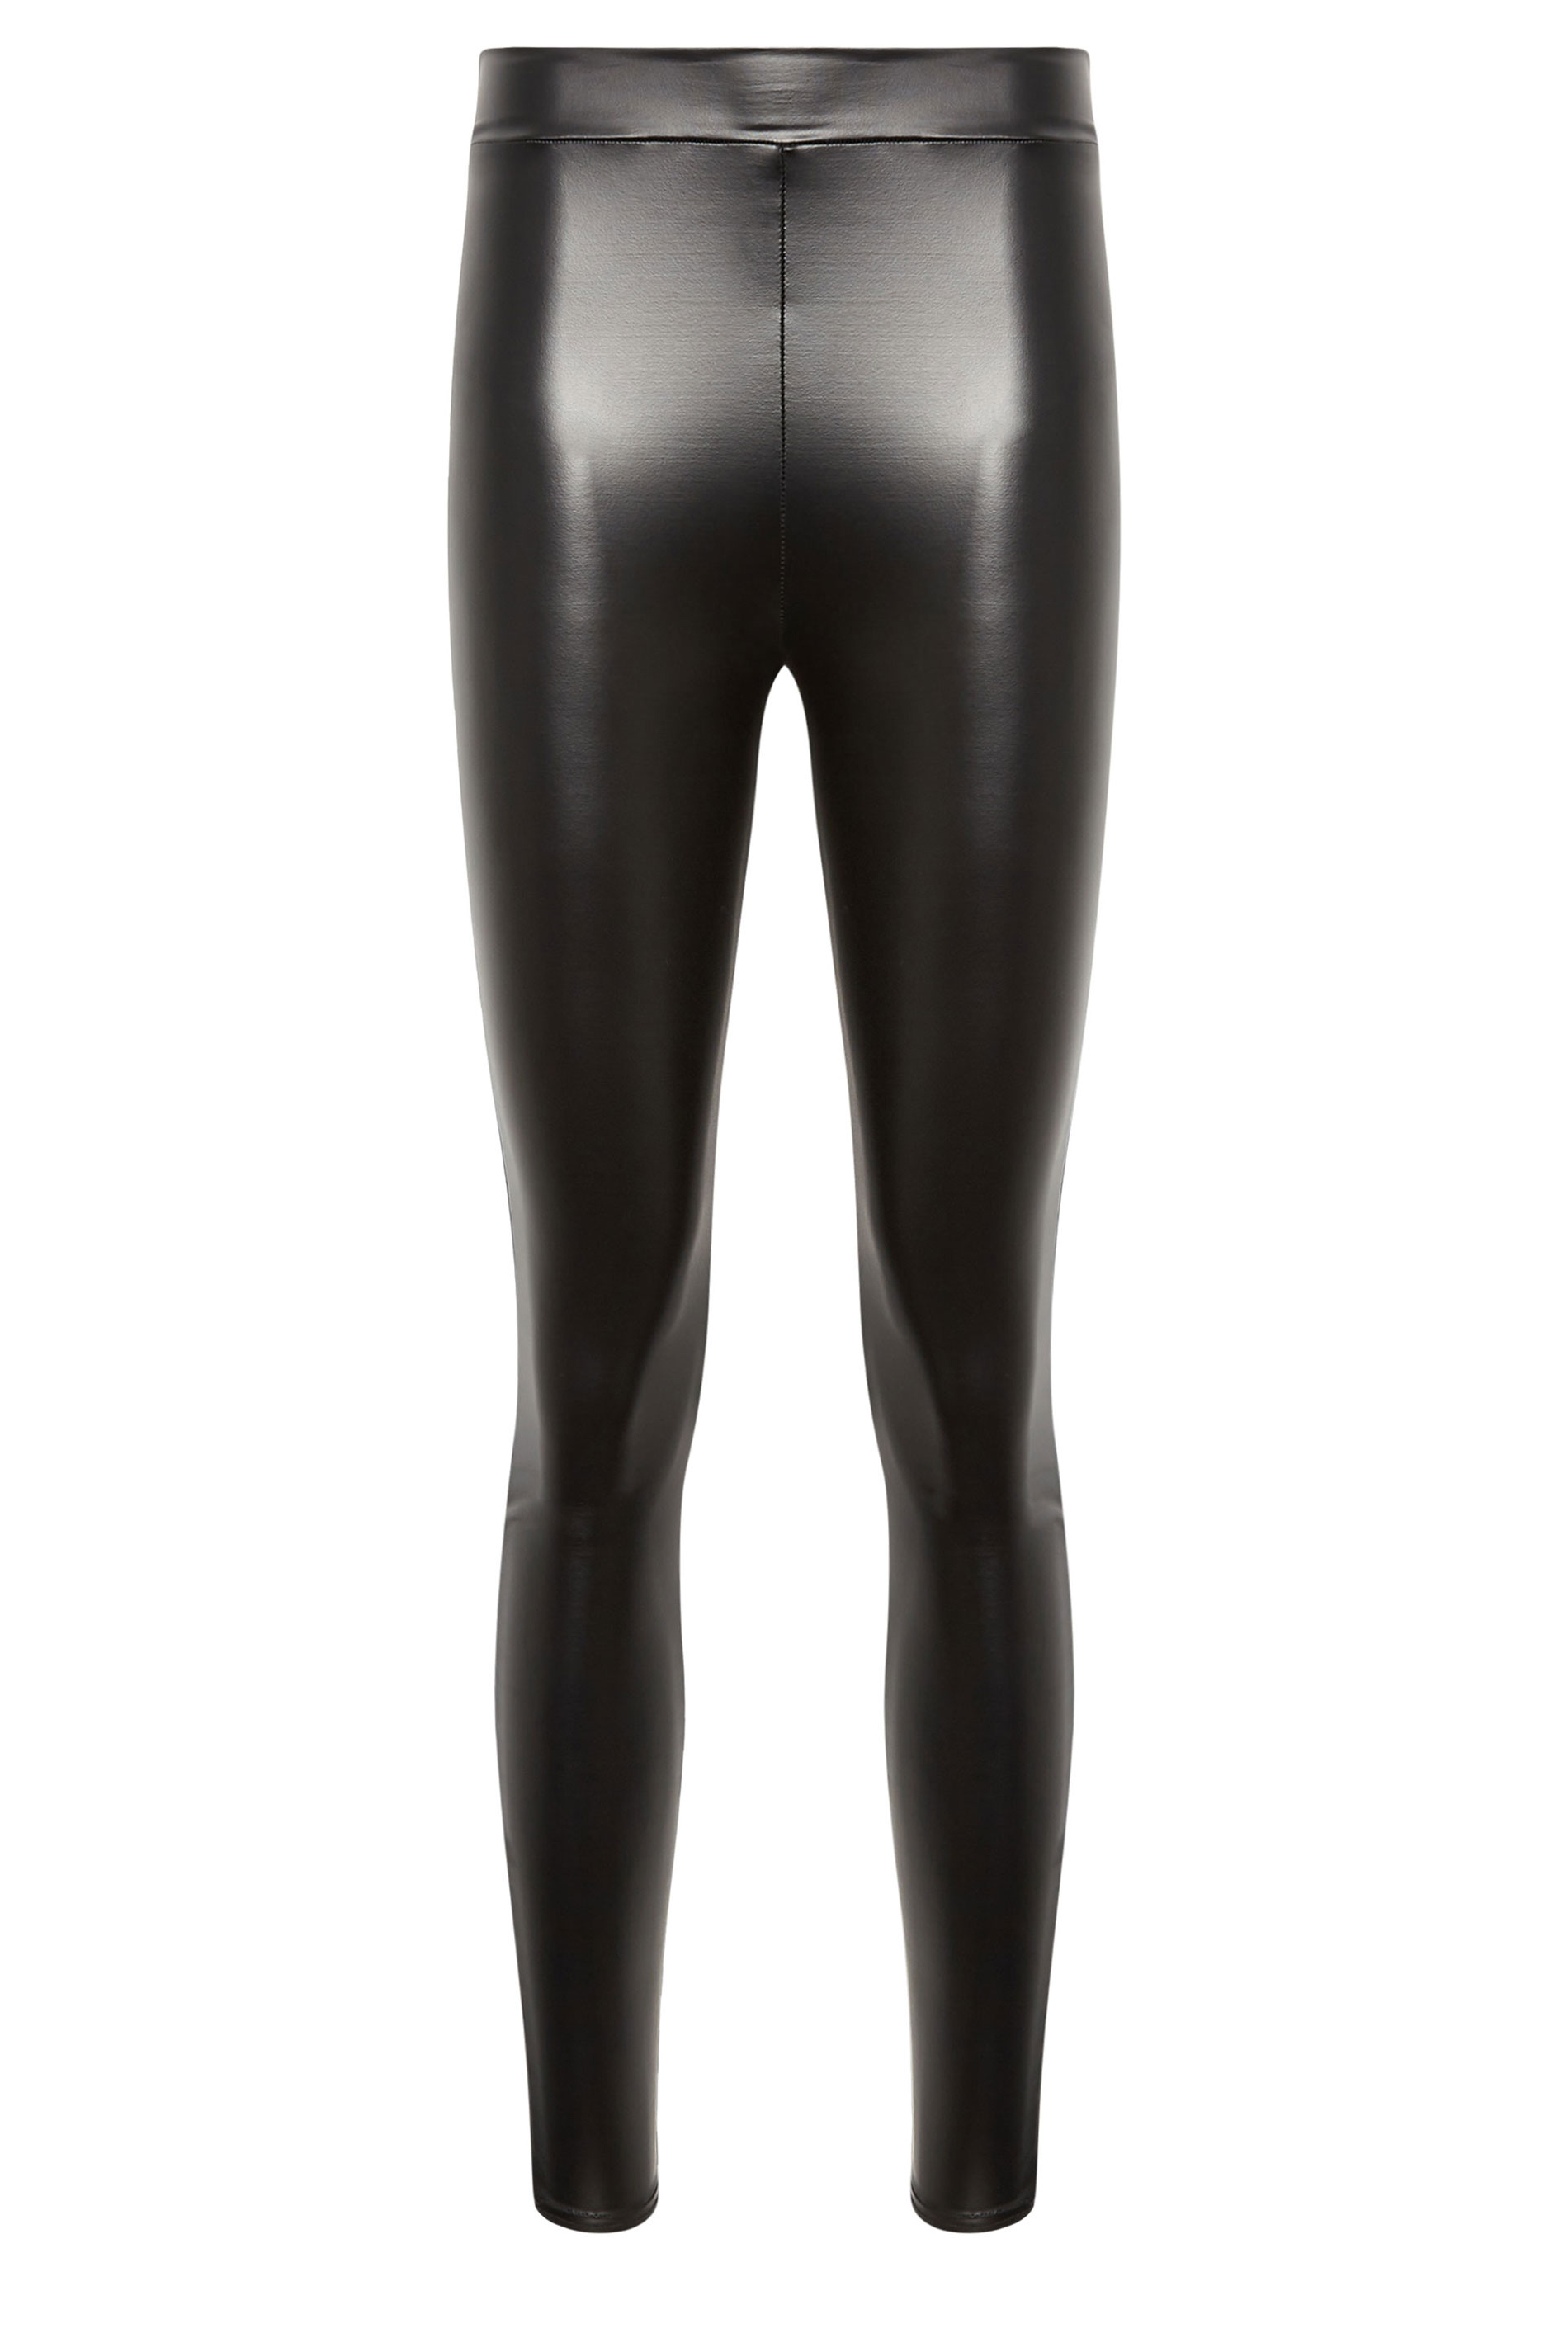 Alloy Apparel Tall Lexi Legging for Women in Eggplant Size 2XL